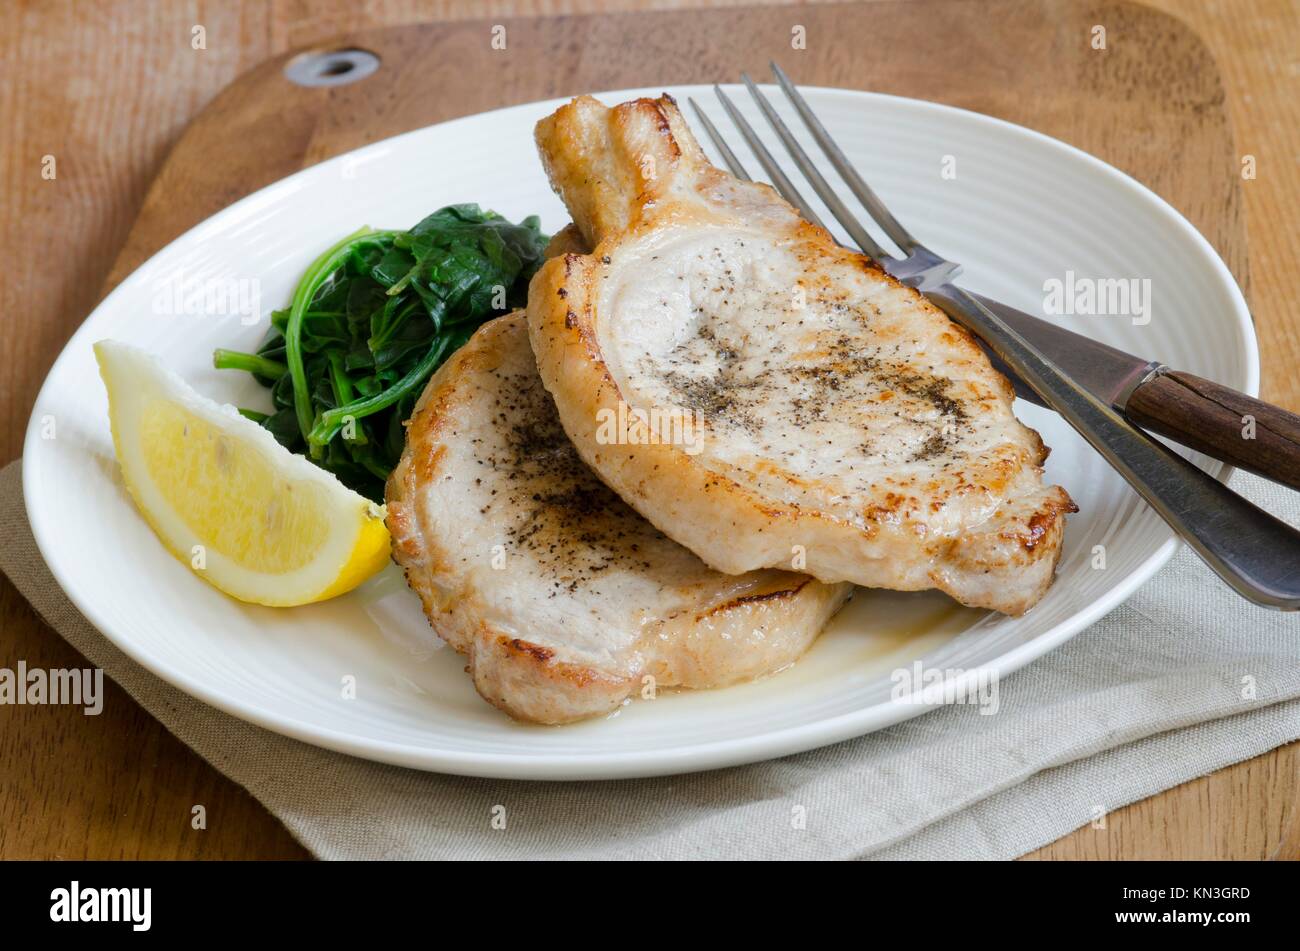 Pork chops with wilted spinach on a plate. Stock Photo